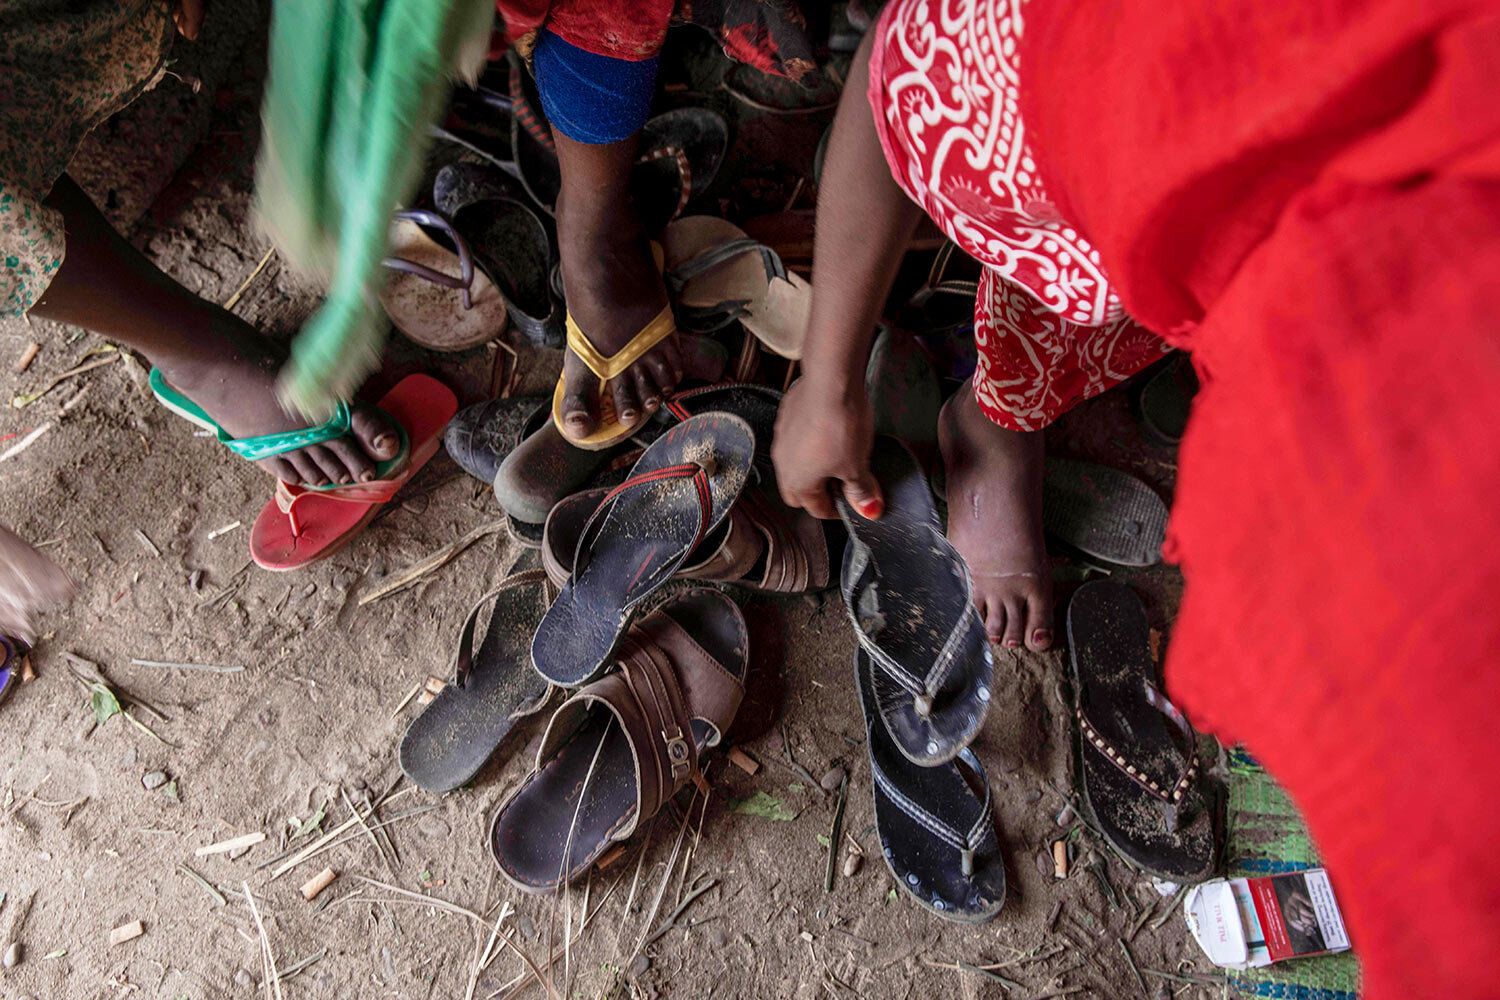 In this July 26, 2019 photo, Ethiopian migrant girls put on their slippers to go and eat outside their lockup known in Arabic as a "hosh," in Ras al-Ara, Lahj, Yemen. Some lockups hold as many as 50 women at a time. The women will stay here for several days until their transportation is ready. Image by Nariman El-Mofty / AP Photo. Yemen, 2019.